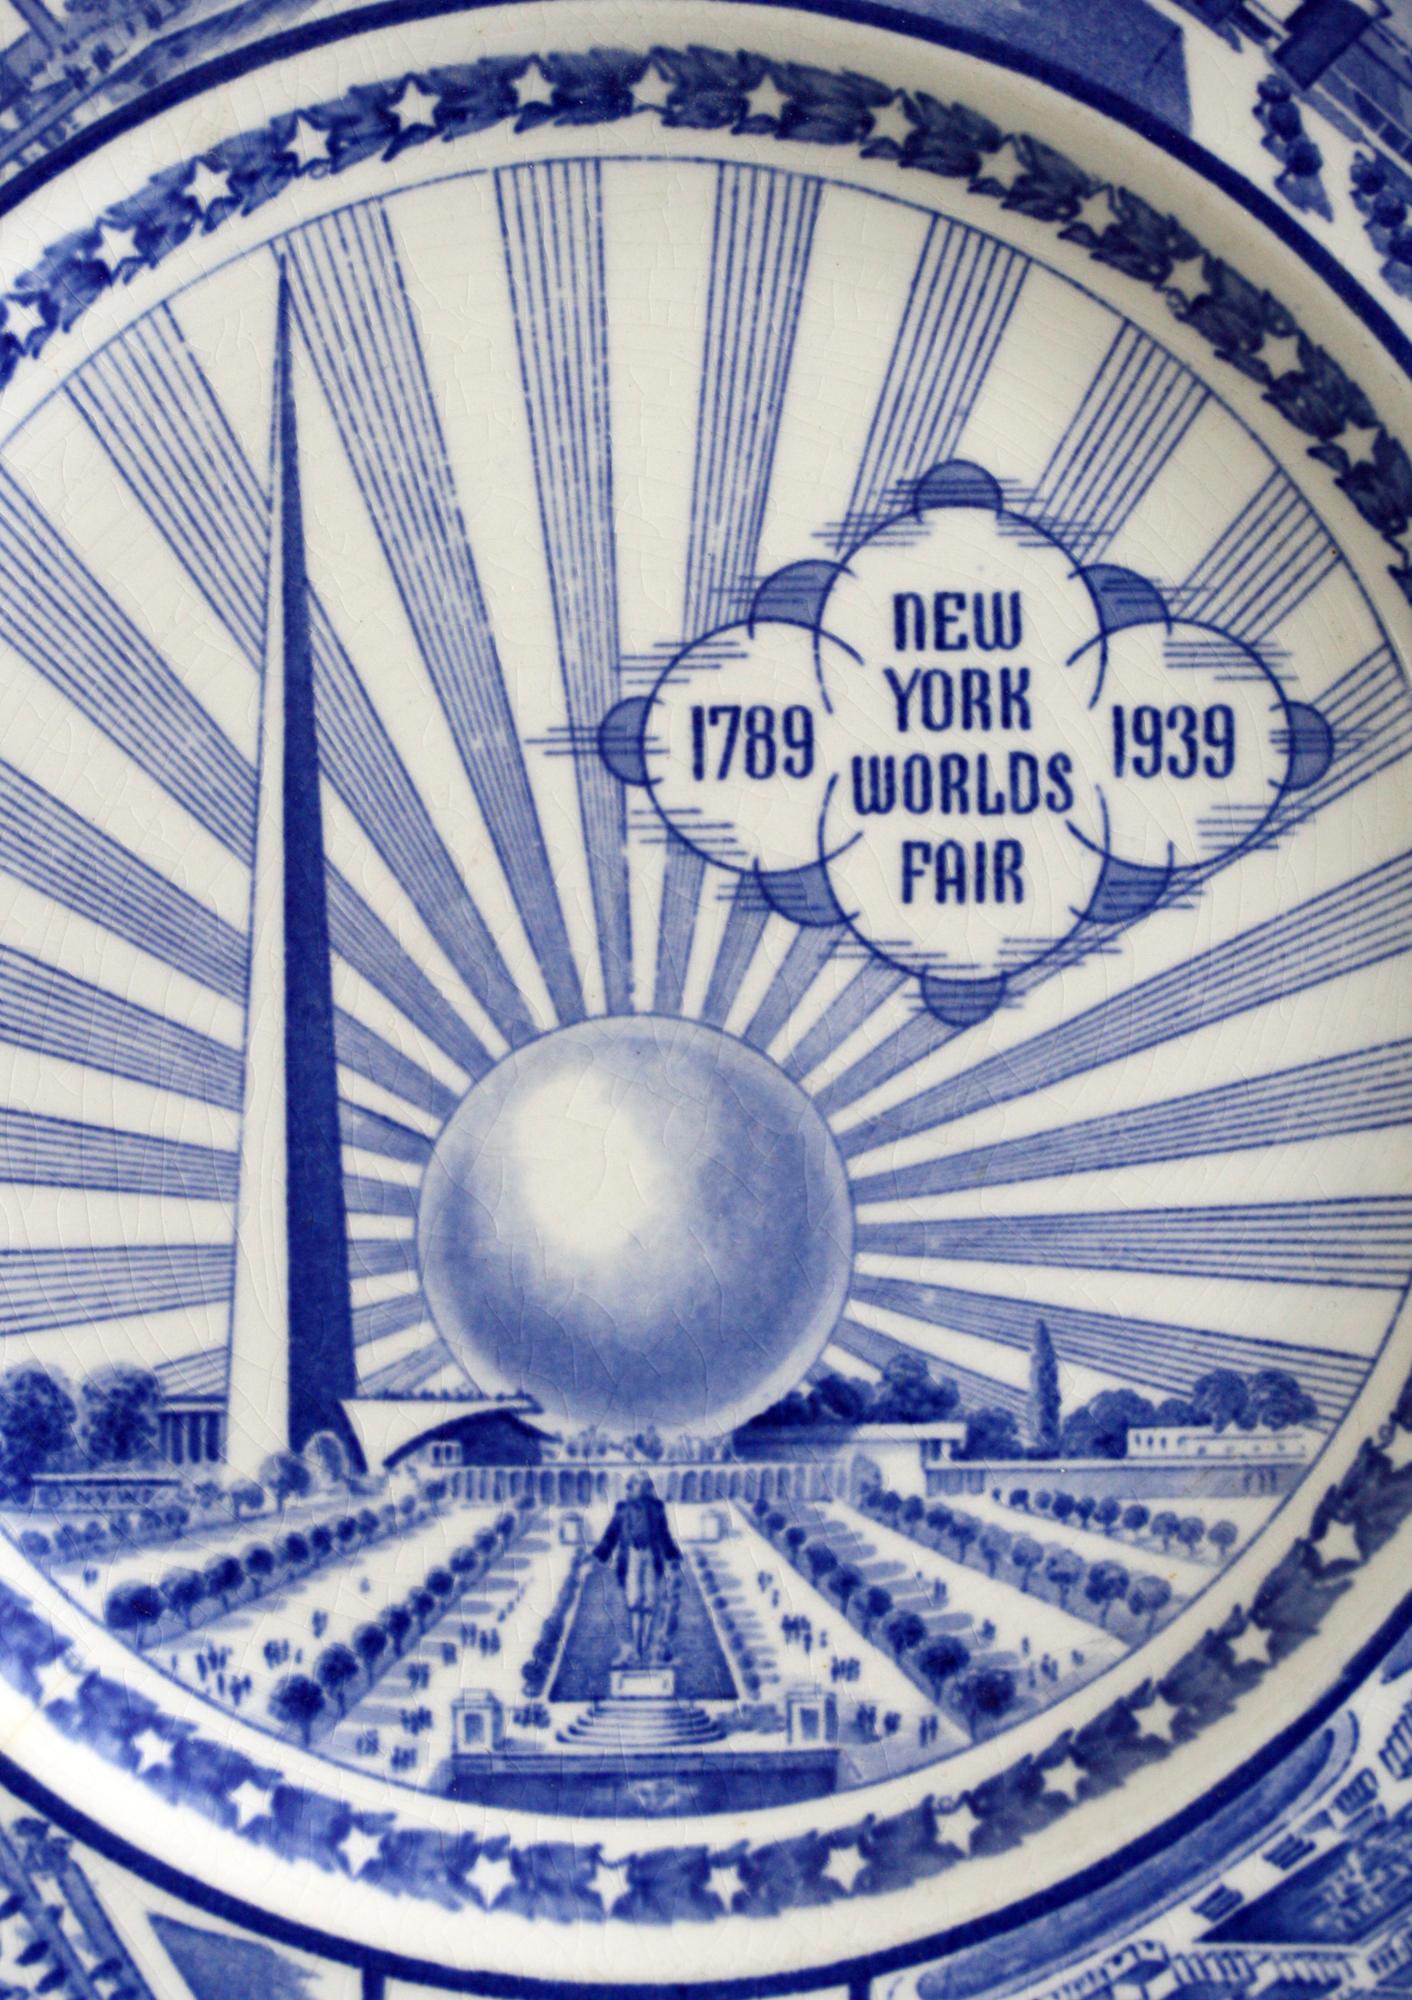 J & G Meakin New York Worlds Fair Commemorative Pottery Plate, 1939 6